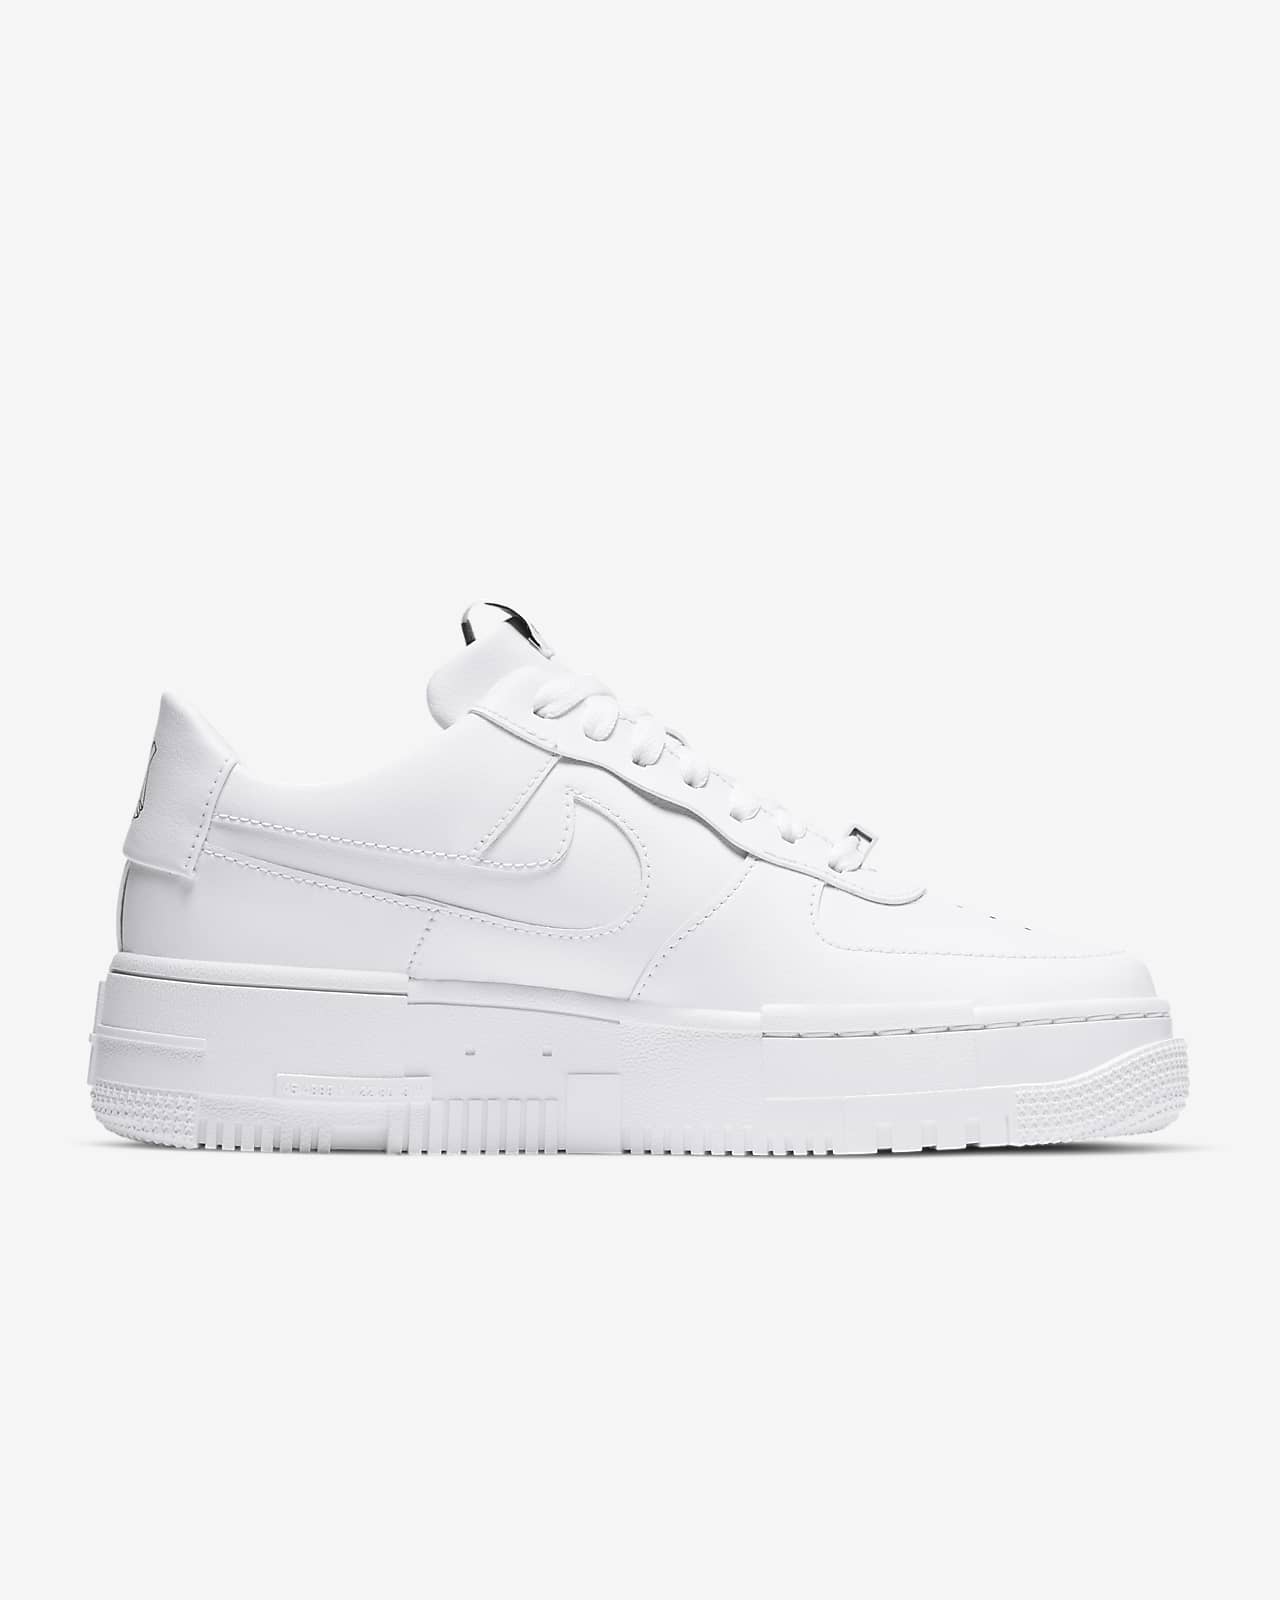 air force 1 white pick up in store